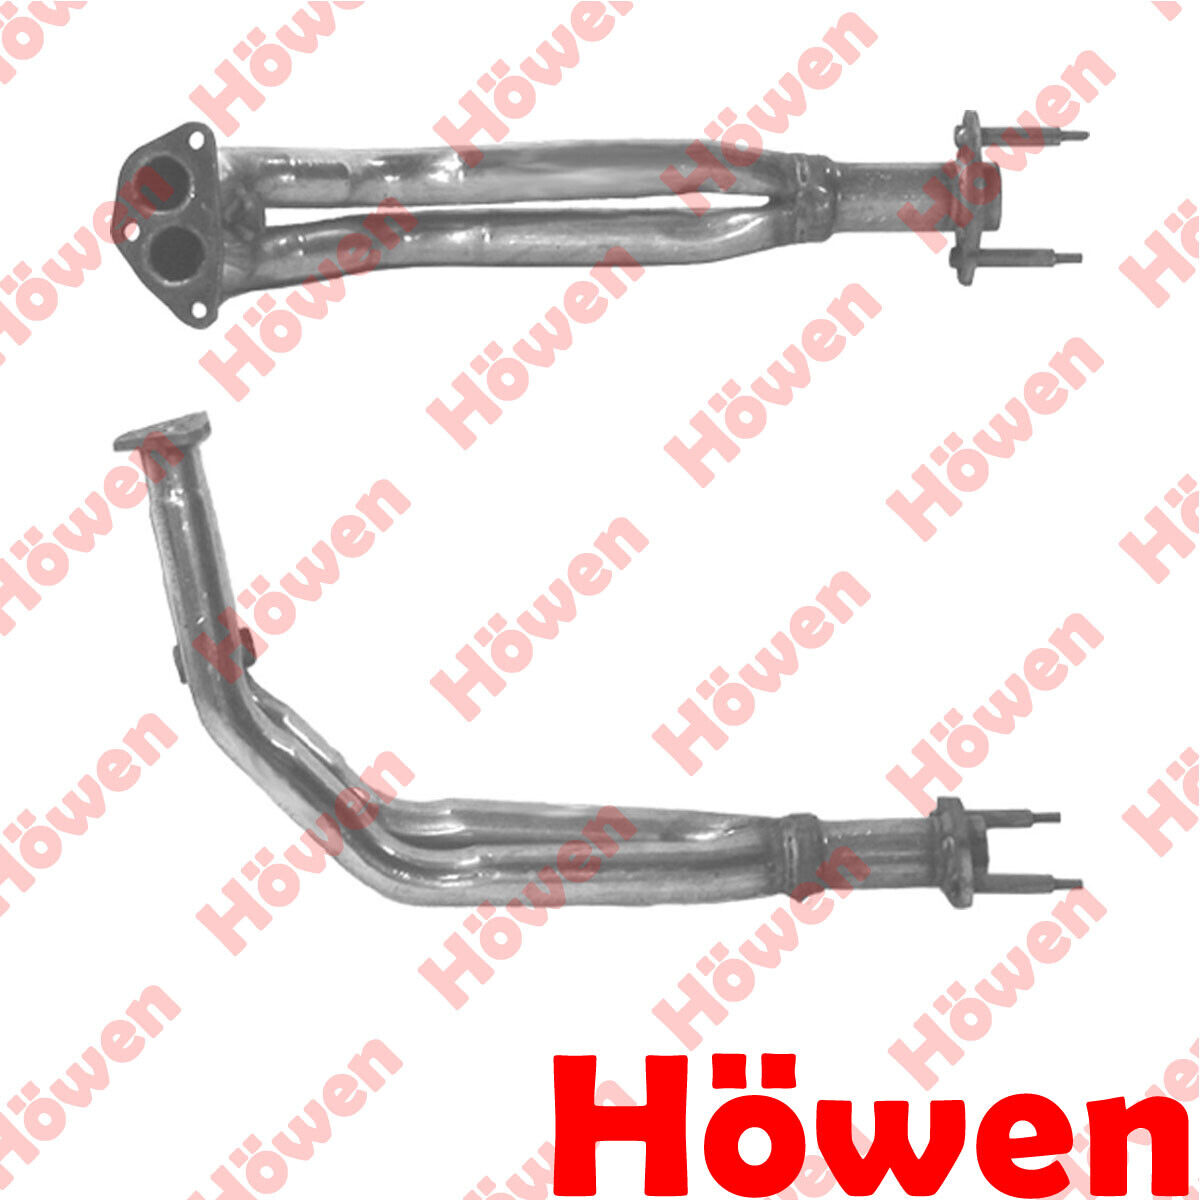 Fits Fiat Uno 1993-1995 1.0 1.1 Exhaust Pipe Euro 2 Front Howen 7772600